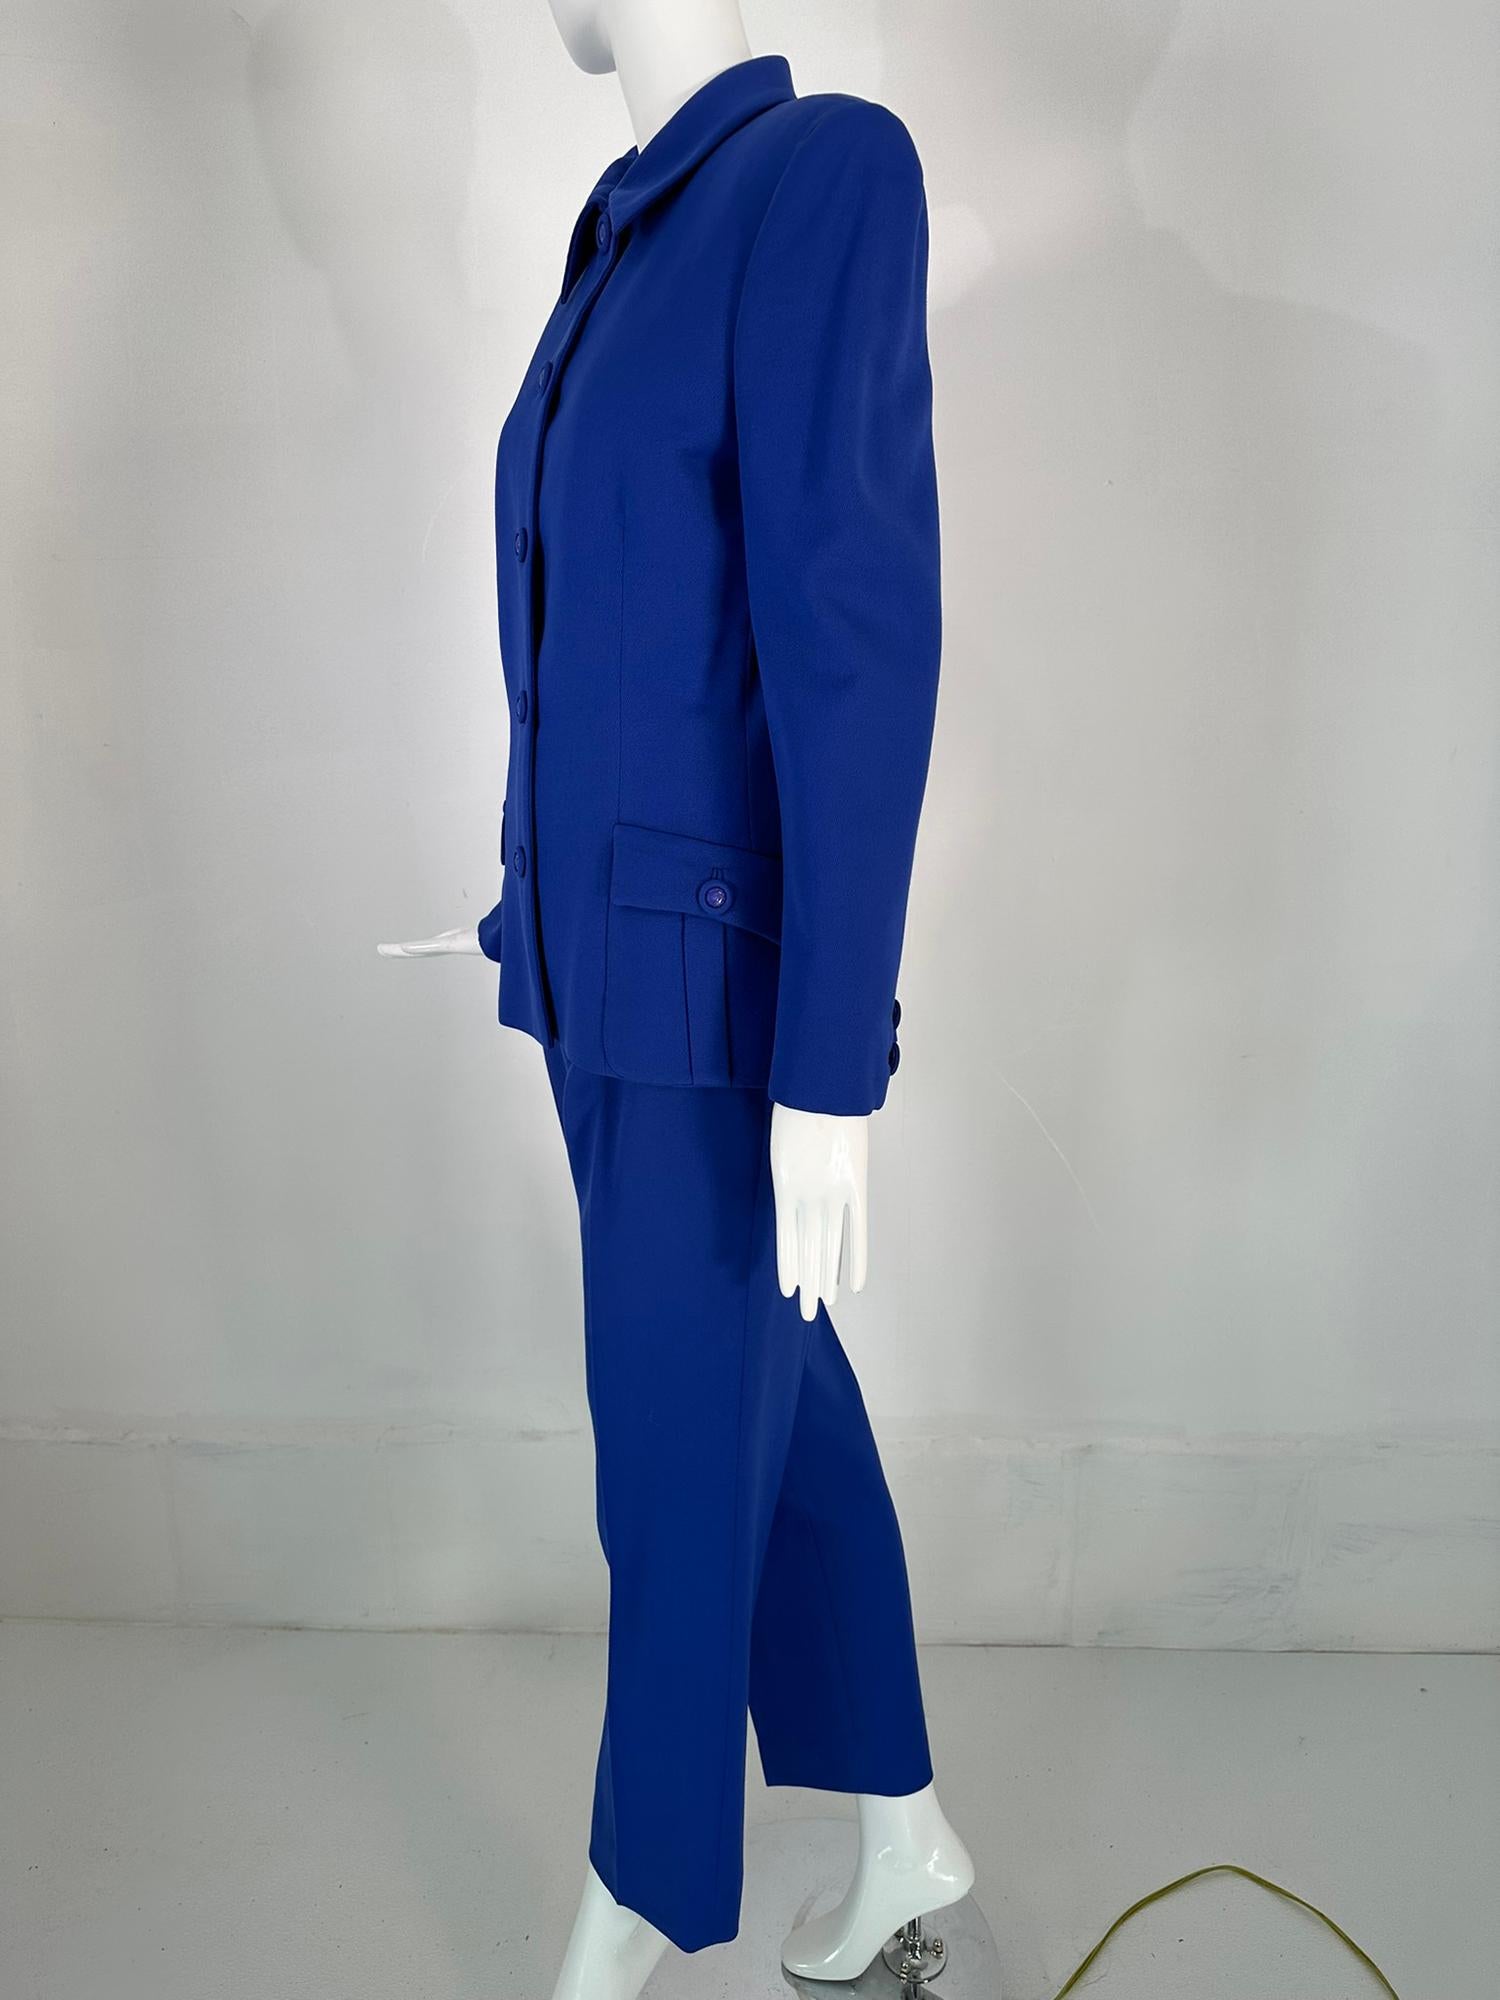 Gianni Versace Couture F/W 1995 Royal Blue Wool Pant Suit  In Good Condition For Sale In West Palm Beach, FL